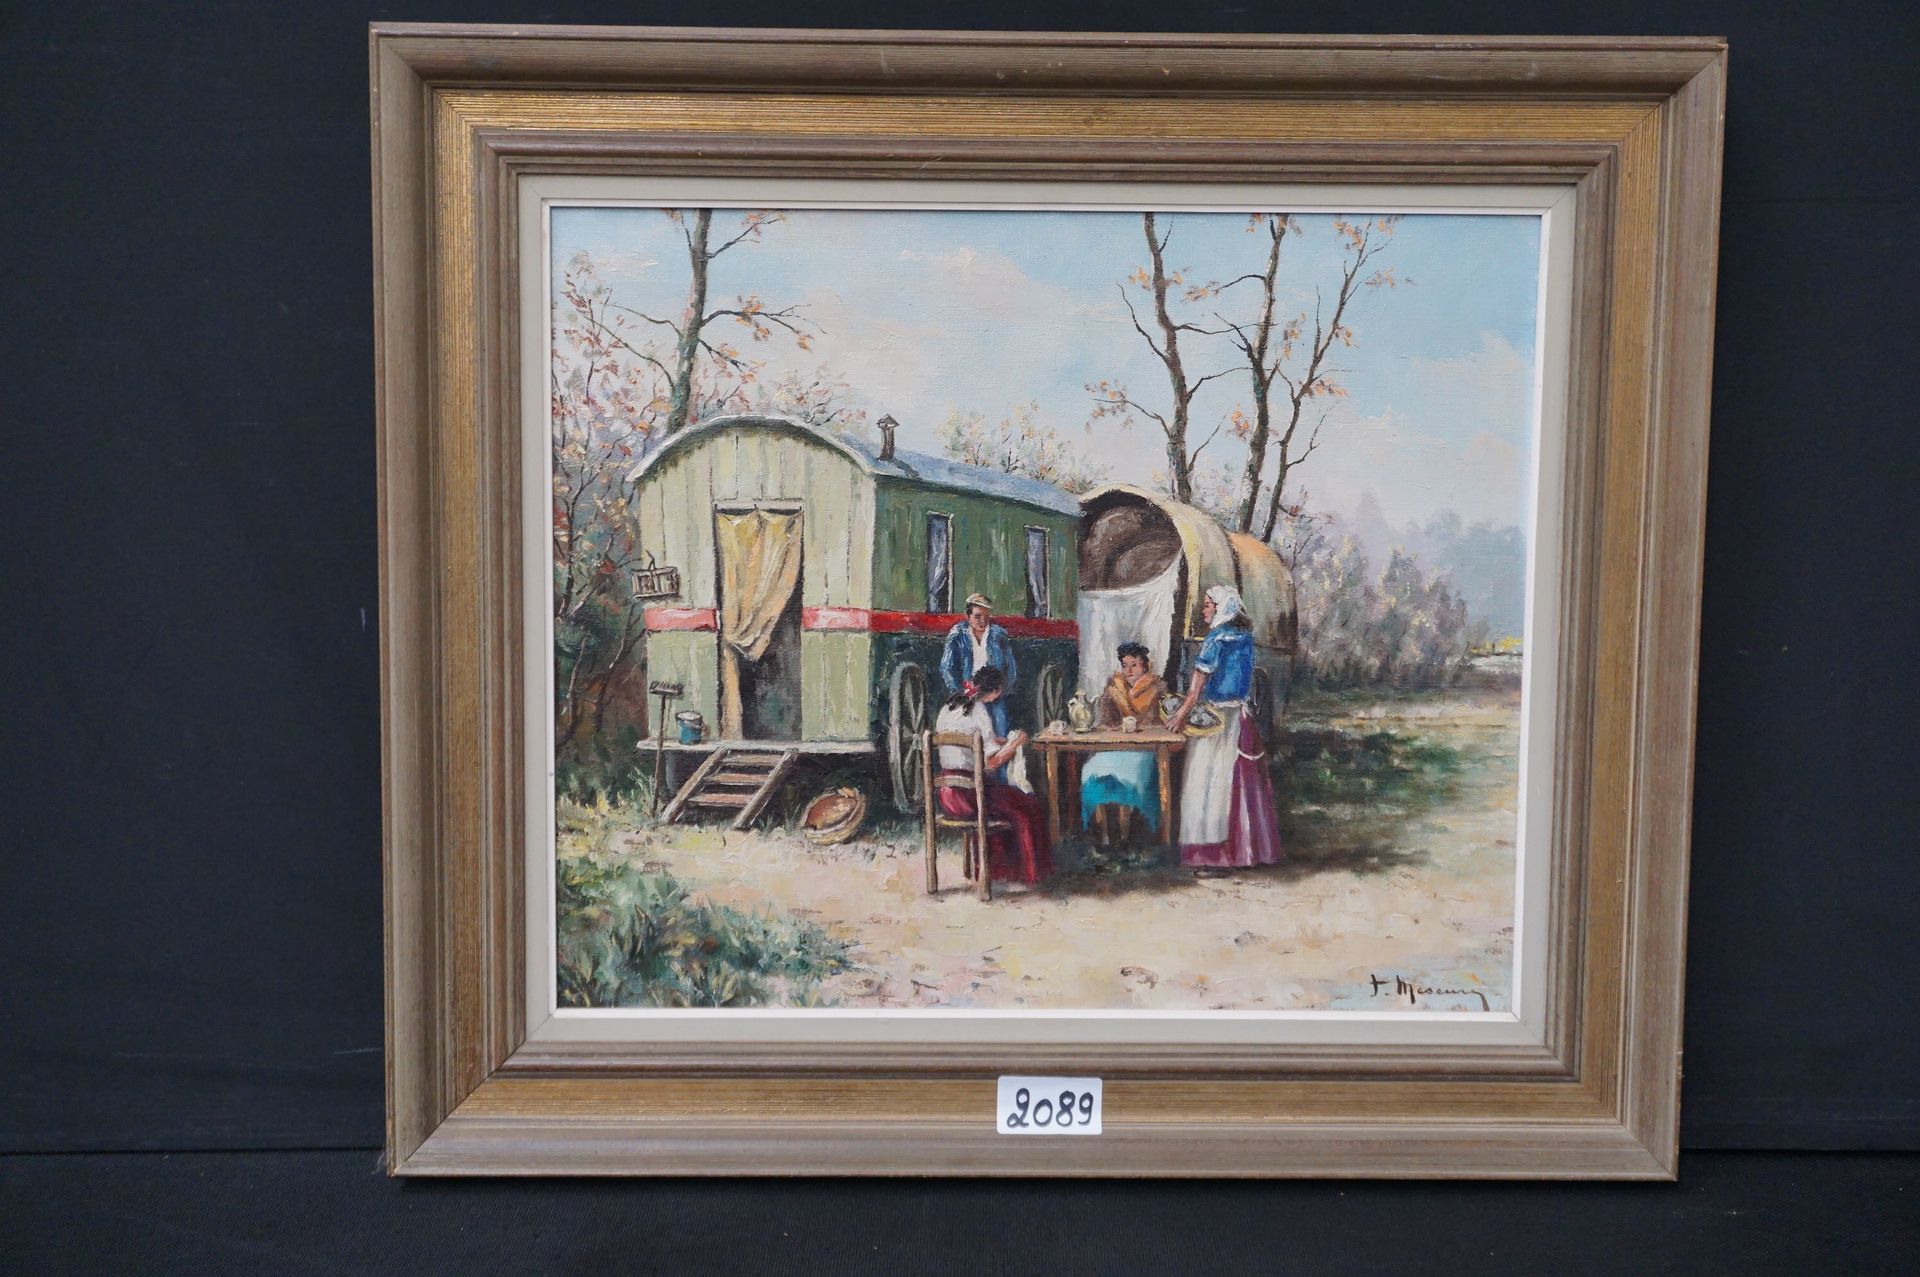 F. MESEURE "Characters at the caravans" - Oil on canvas - Signed - 50 x 60 cm